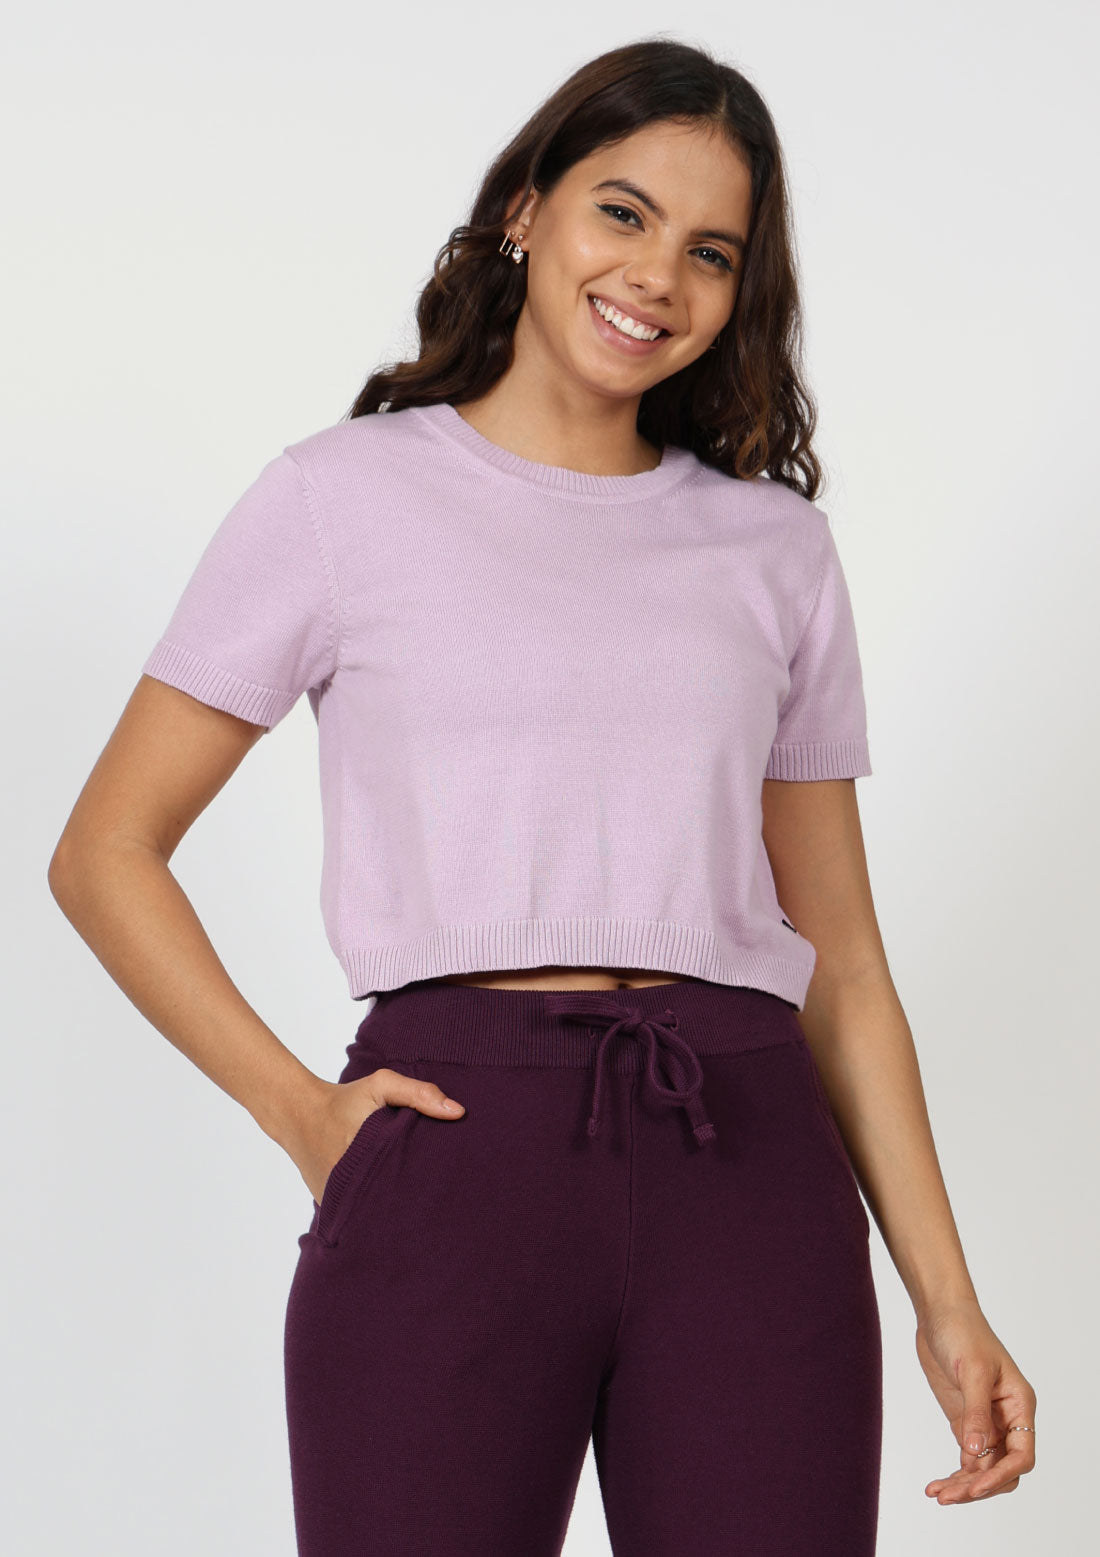 Buy BlissClub Pointelle at-Ease CottonKnit Top